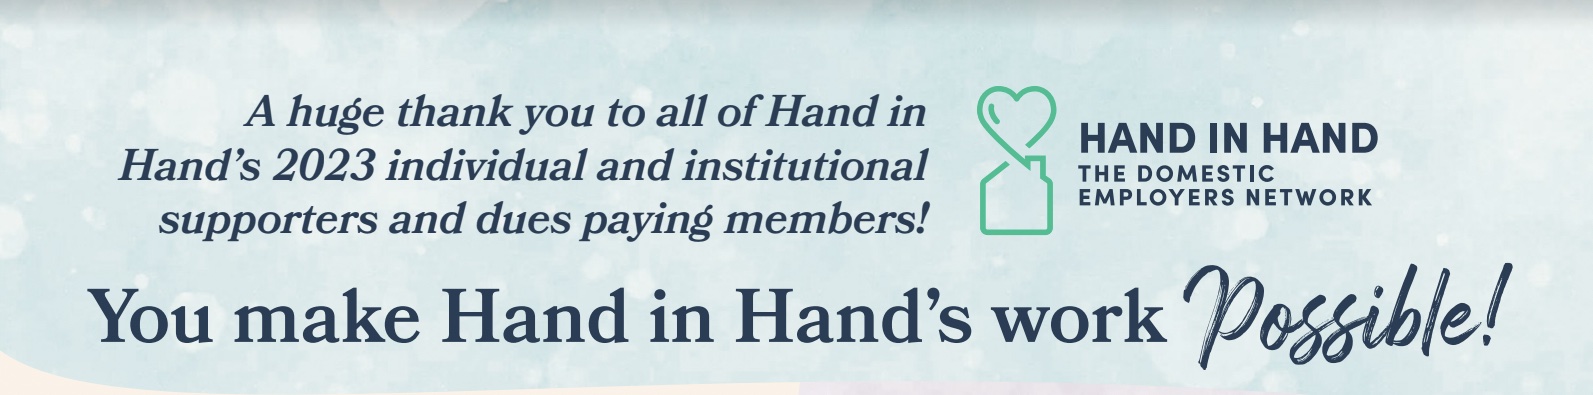 Header that reads " A huge thank you to all of Hand in Hand's 2023 individual and institutional supporters and dues paying members!"